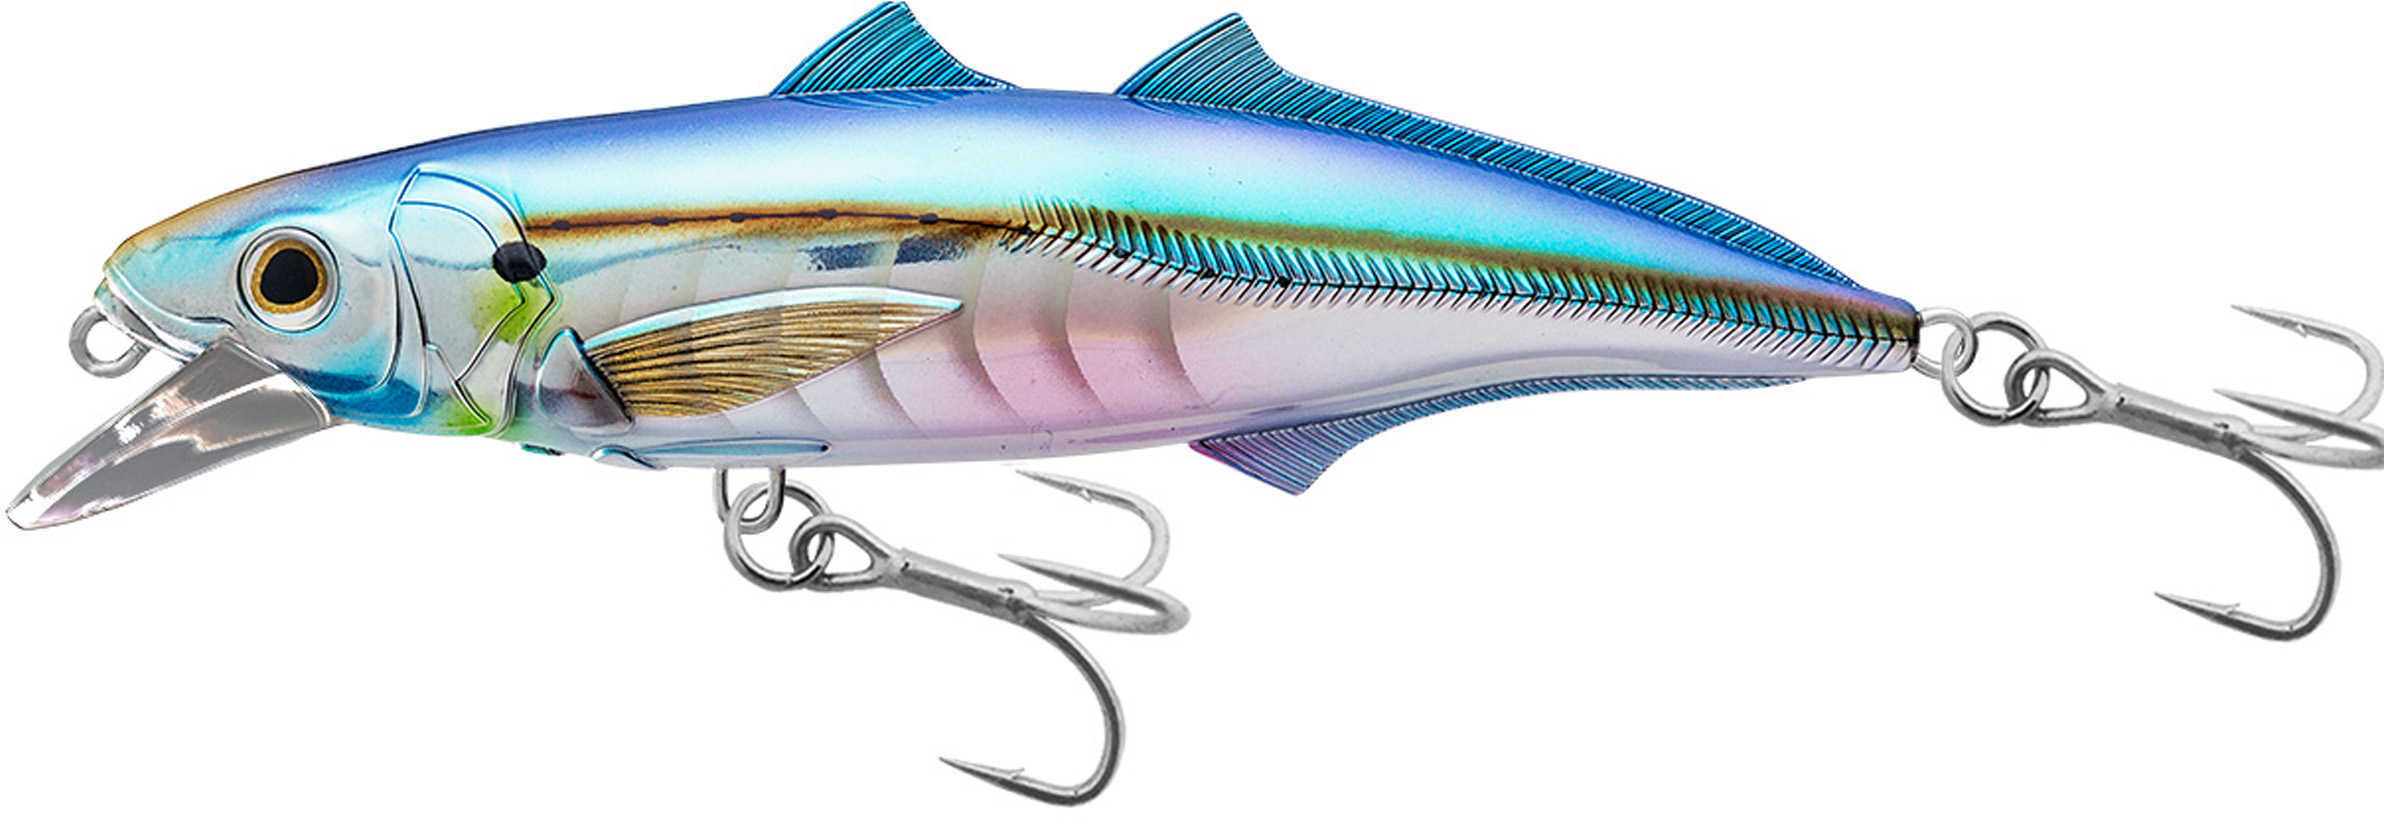 LIVETARGET Lures / Koppers Fishing and Tackle Corp Cigar Minow Jerkbait 6" Number 2/0 Hook Size 2-6 Depth Pearl/Blue Md: CMJ152S9